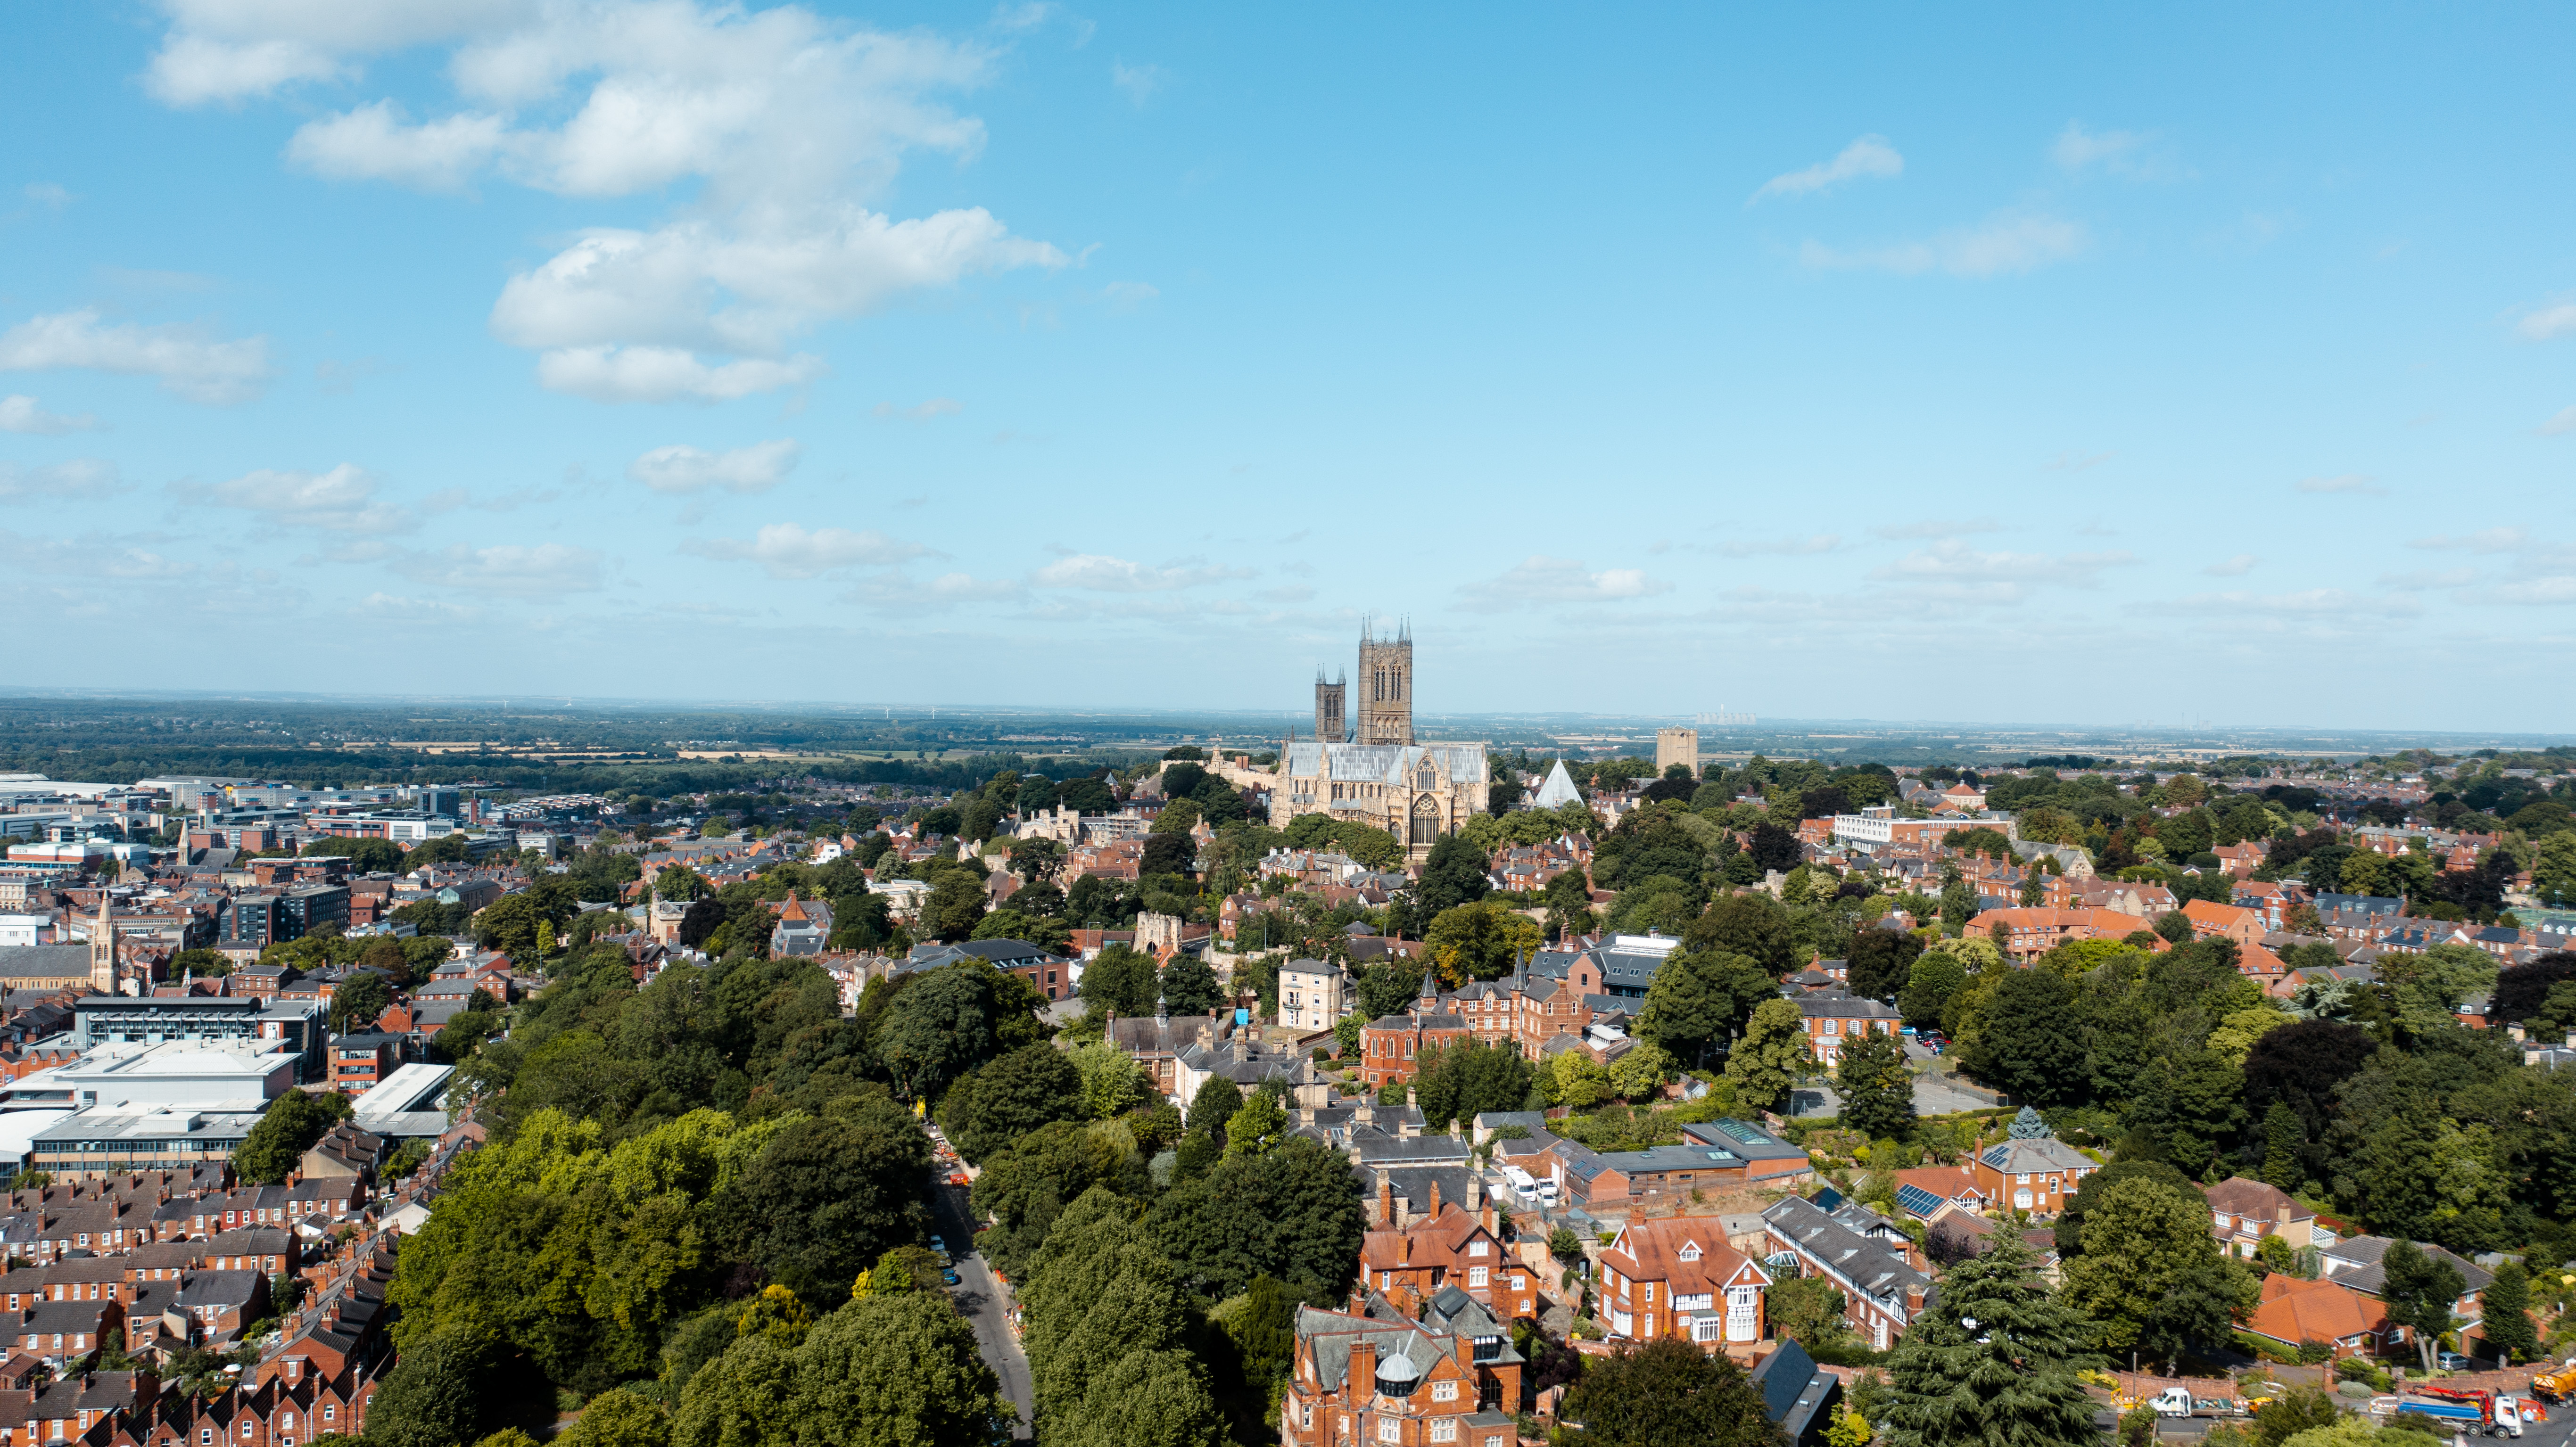 View of Lincoln from a drone